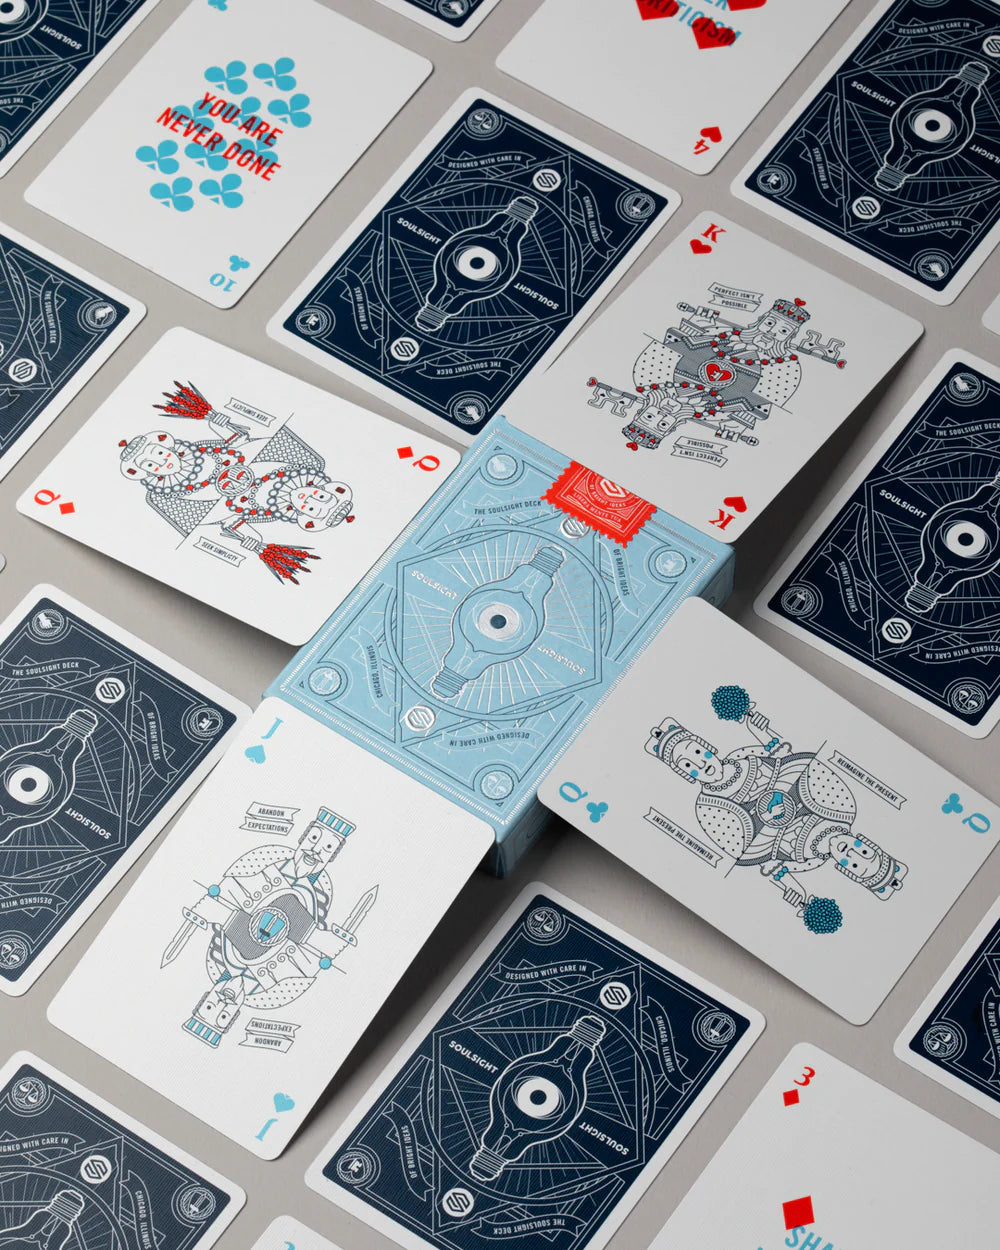 SPARK PLAYING CARDS